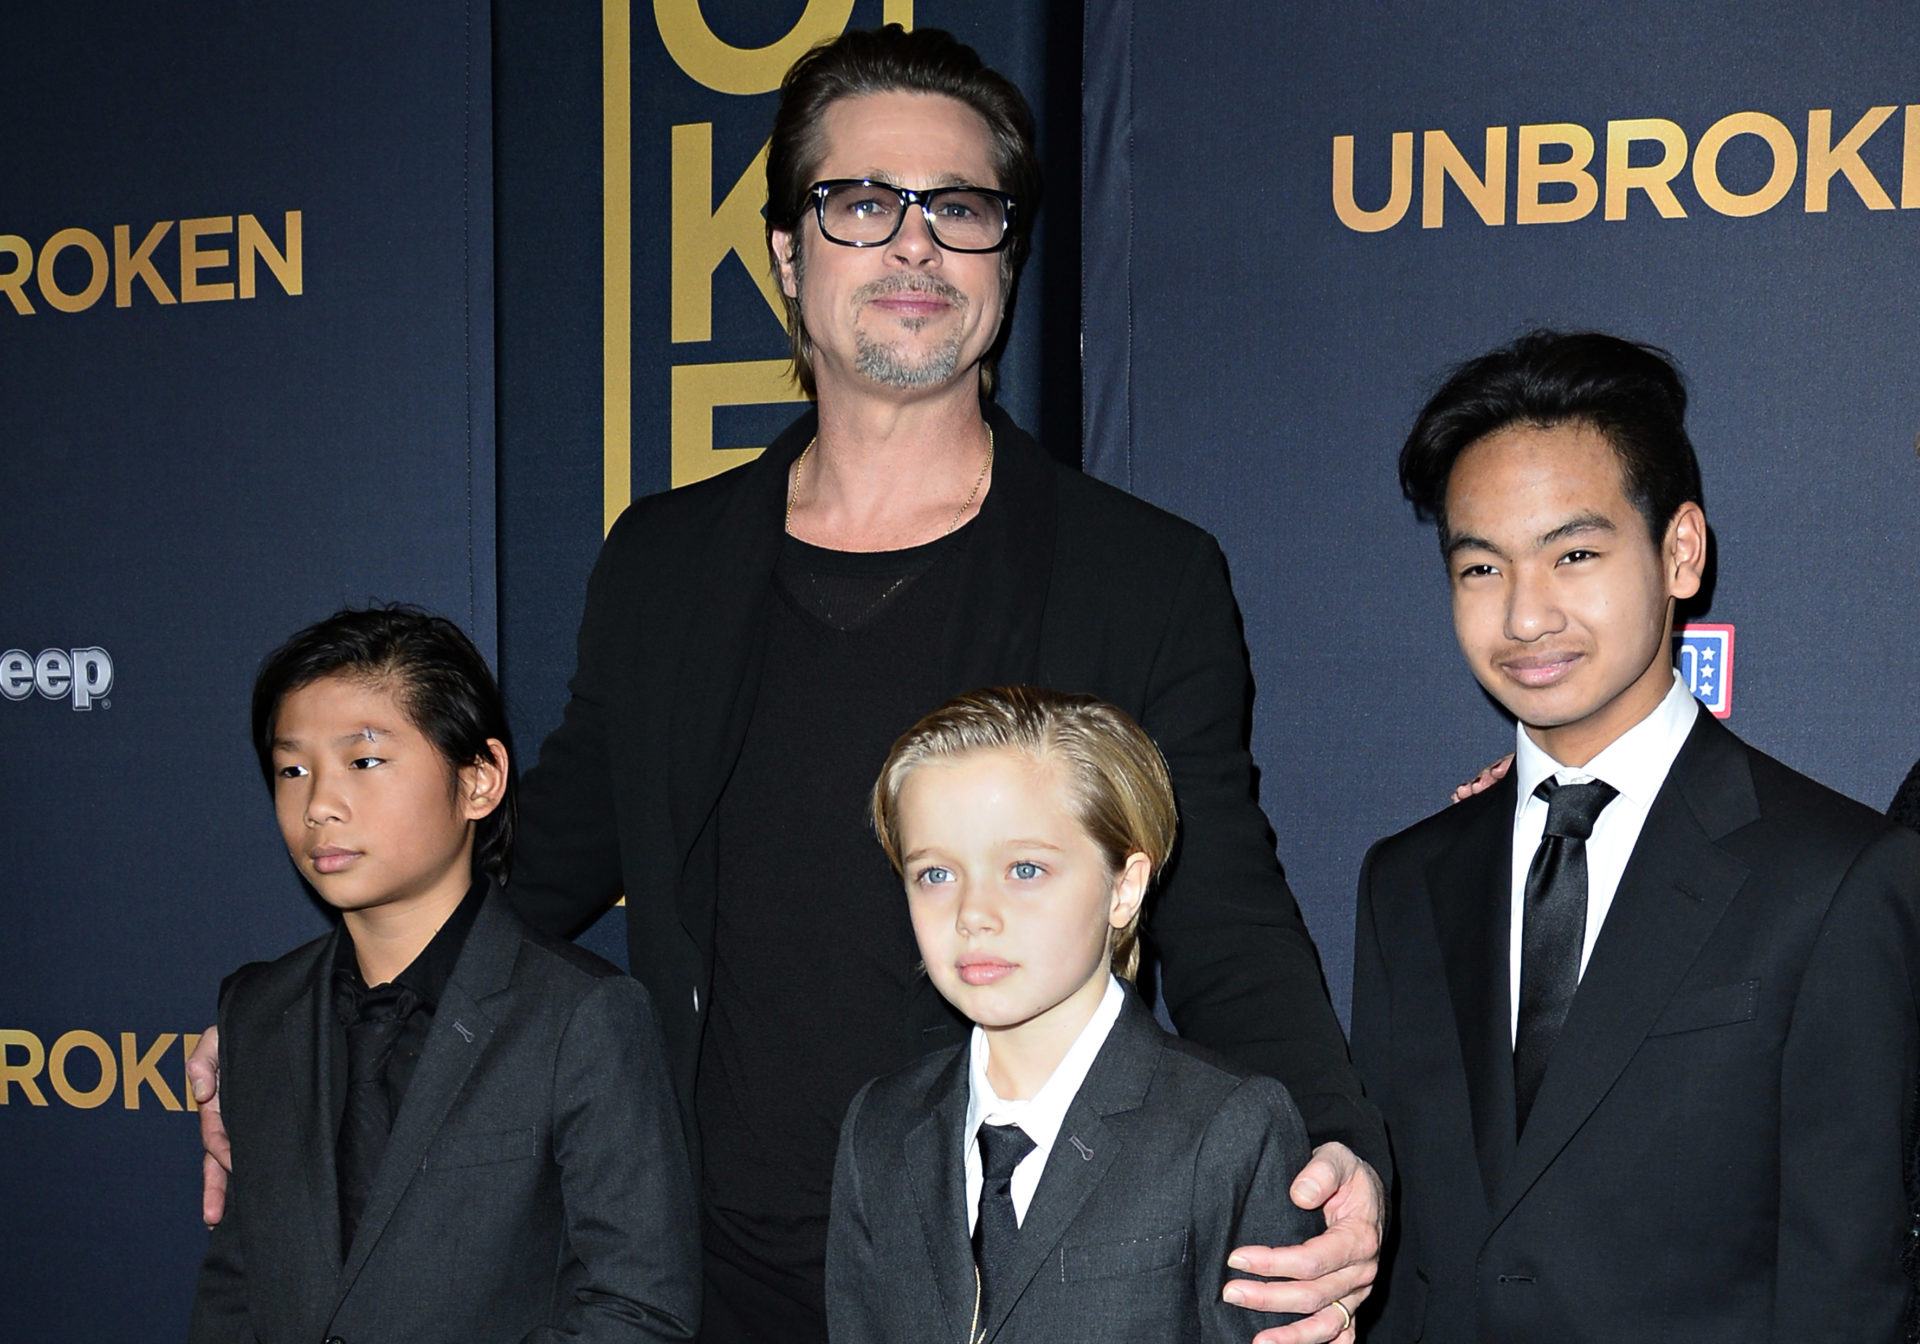 (FILES) This file photo taken on December 15, 2014 shows actor Brad Pitt and children Pax Jolie-Pitt (L), Shiloh Jolie-Pitt (C) and Maddox Jolie-Pitt as they arrive for the US premiere of Universal Pictures "Unbroken,"  at the Dolby Theatre in Hollywood, California.  
Brad Pitt is under investigation by US authorities after being accused of physically and verbally abusing his children during an angry outburst, TMZ reported September 22, 2016. According to the entertainment news site the Los Angeles Police Department began probing Pitt based on an anonymous tip received by the LA County Department of Children and Family Services, as is systematic following any report of child abuse.
 / AFP PHOTO / ROBYN BECKROBYN BECK/AFP/Getty Images